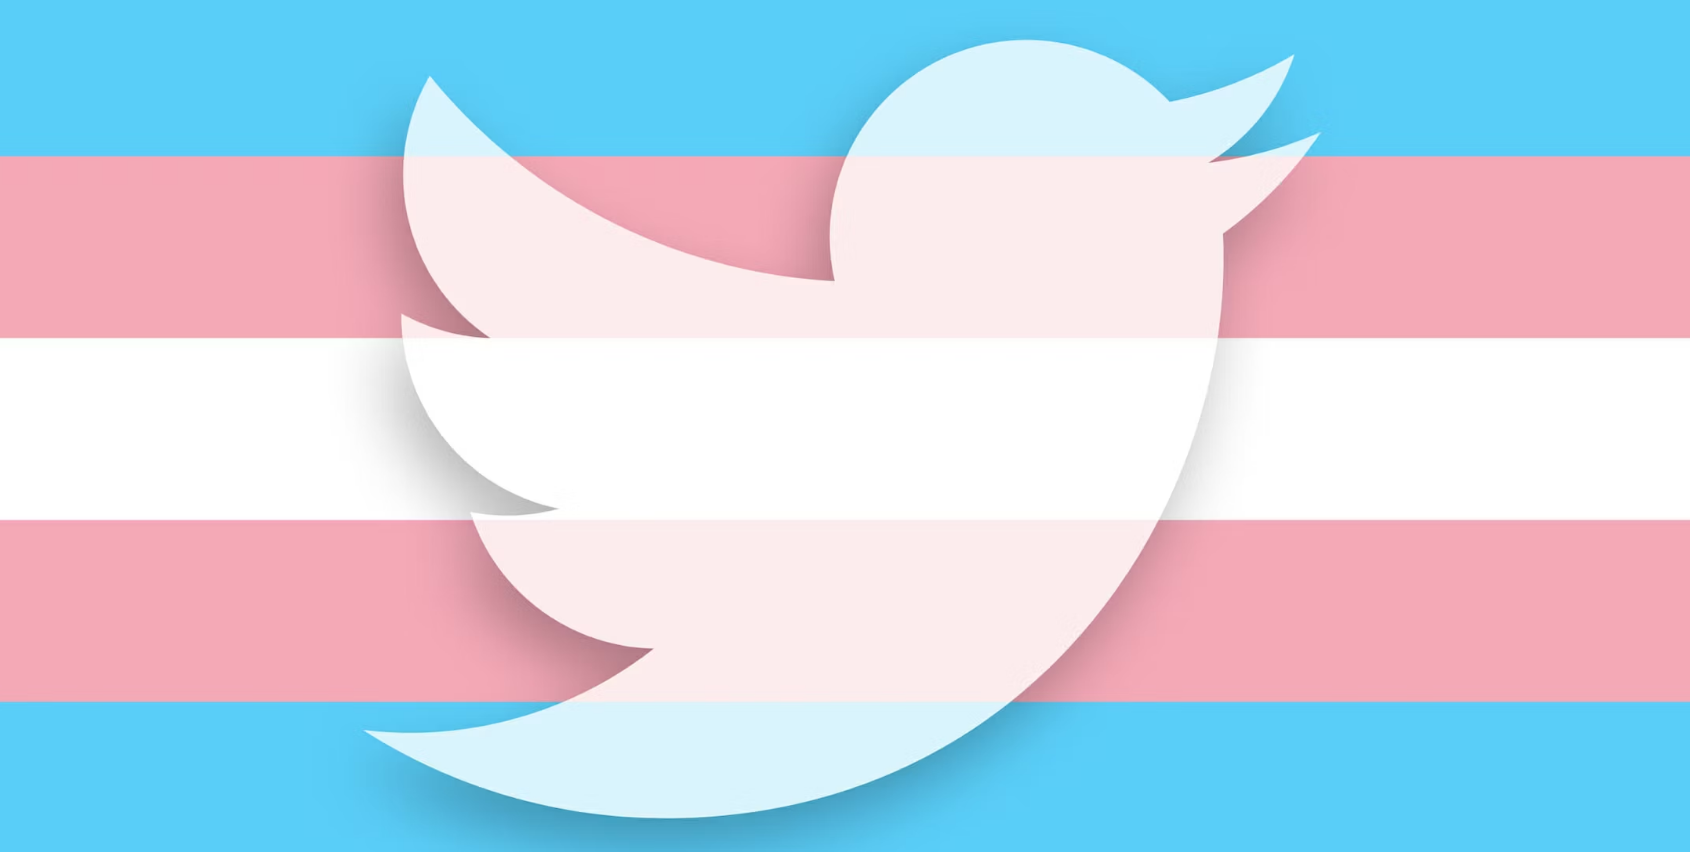 Controversy after Twitter's decision to remove the ban on "misgendering" and using the old name of trans people